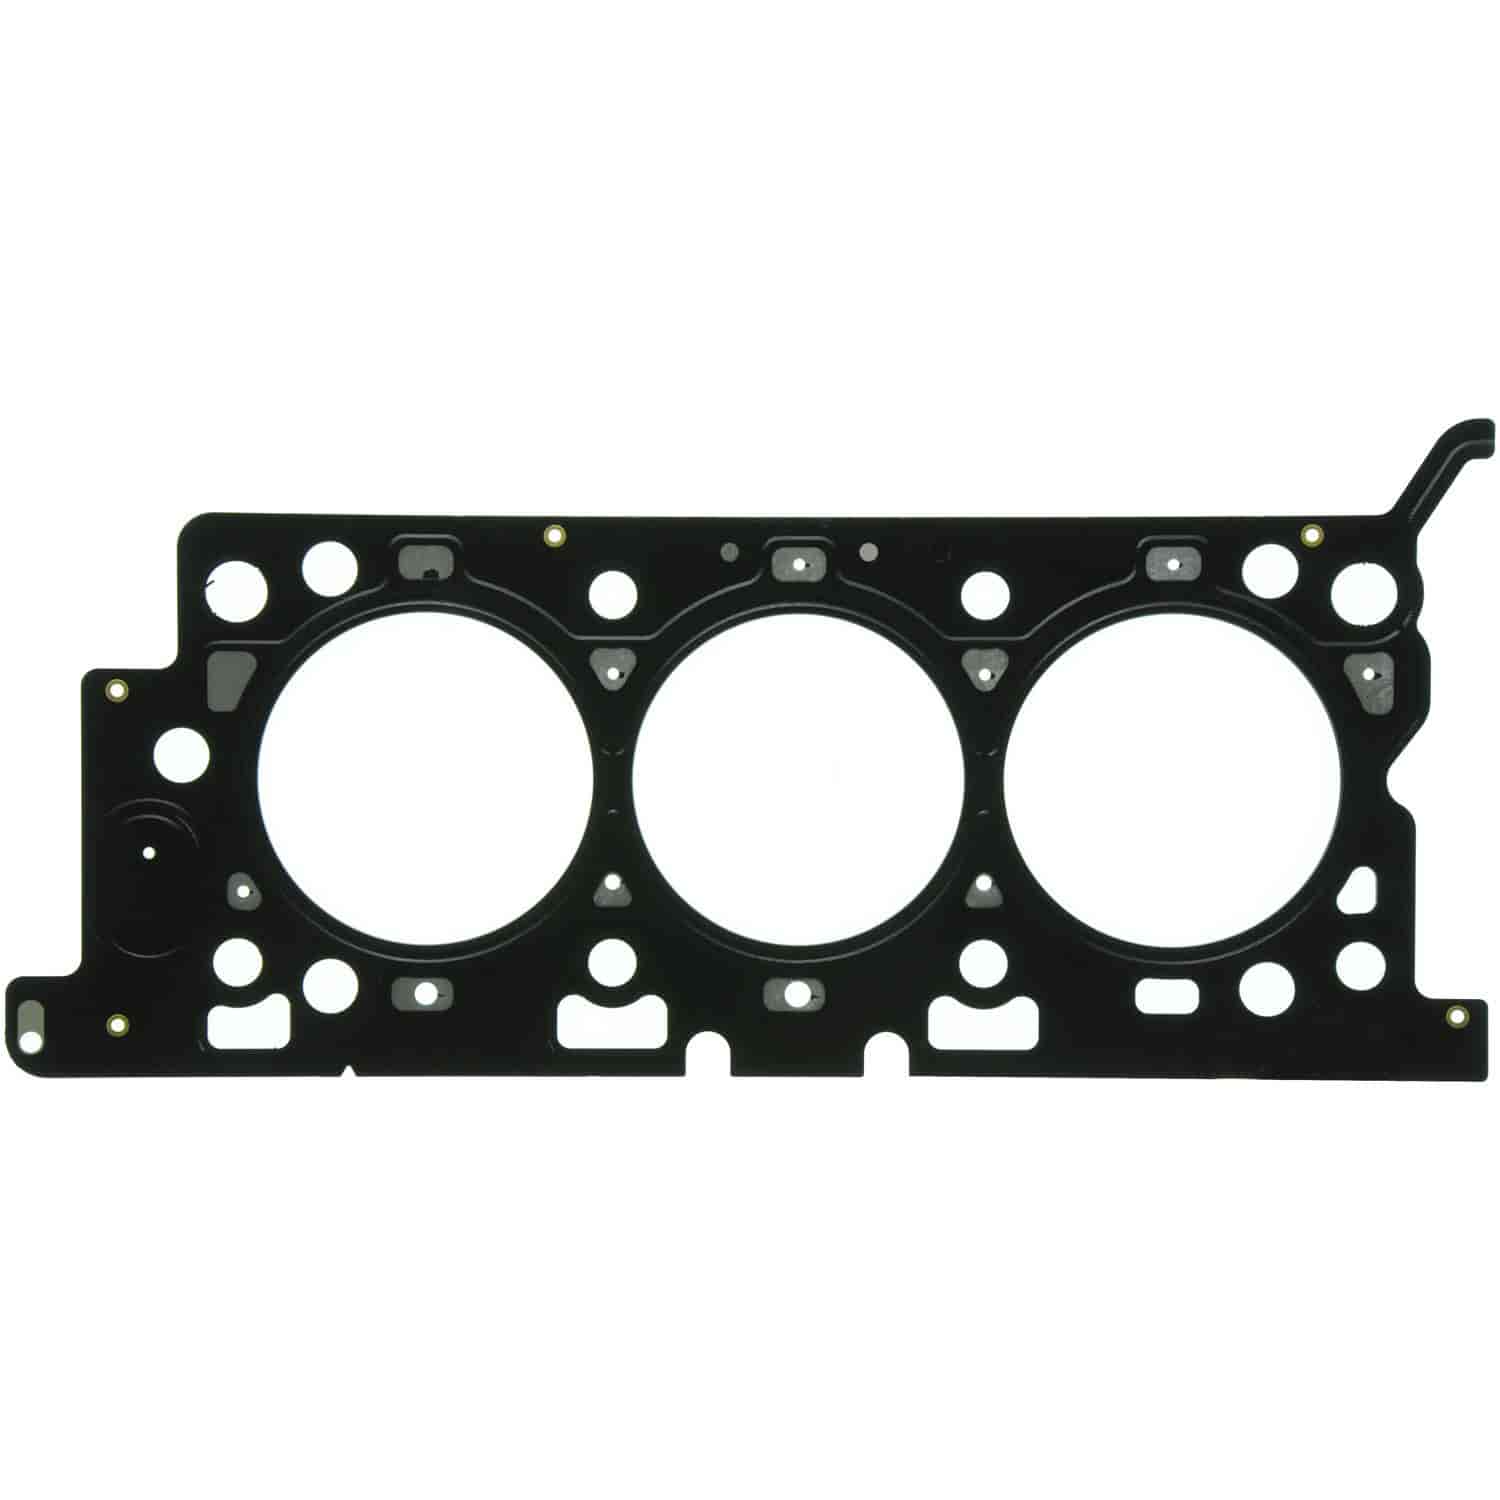 Cylinder Head Gasket Right Ford V6 3.0L DOHC Duratec Taurus & Sable 1996-1998